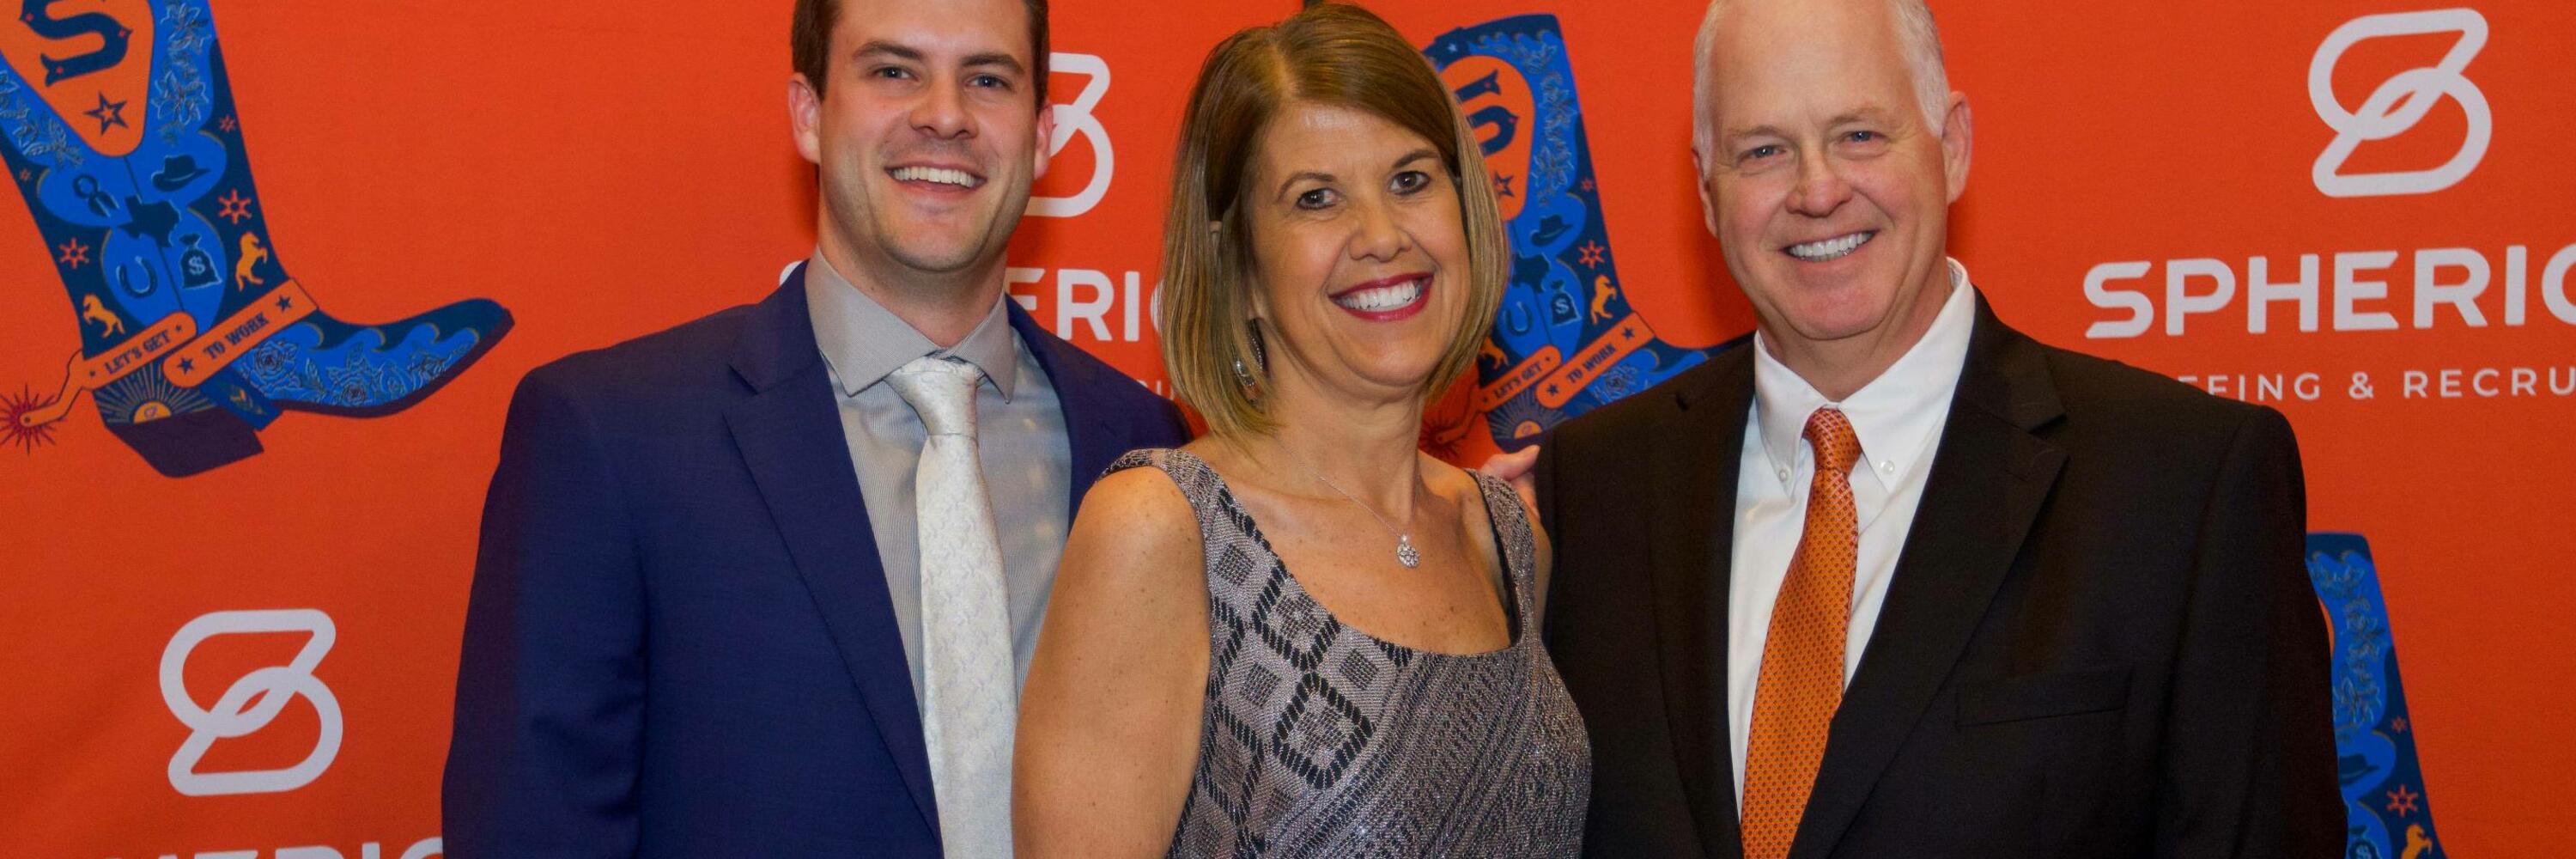 Three people smiling in front of an orange backdrop